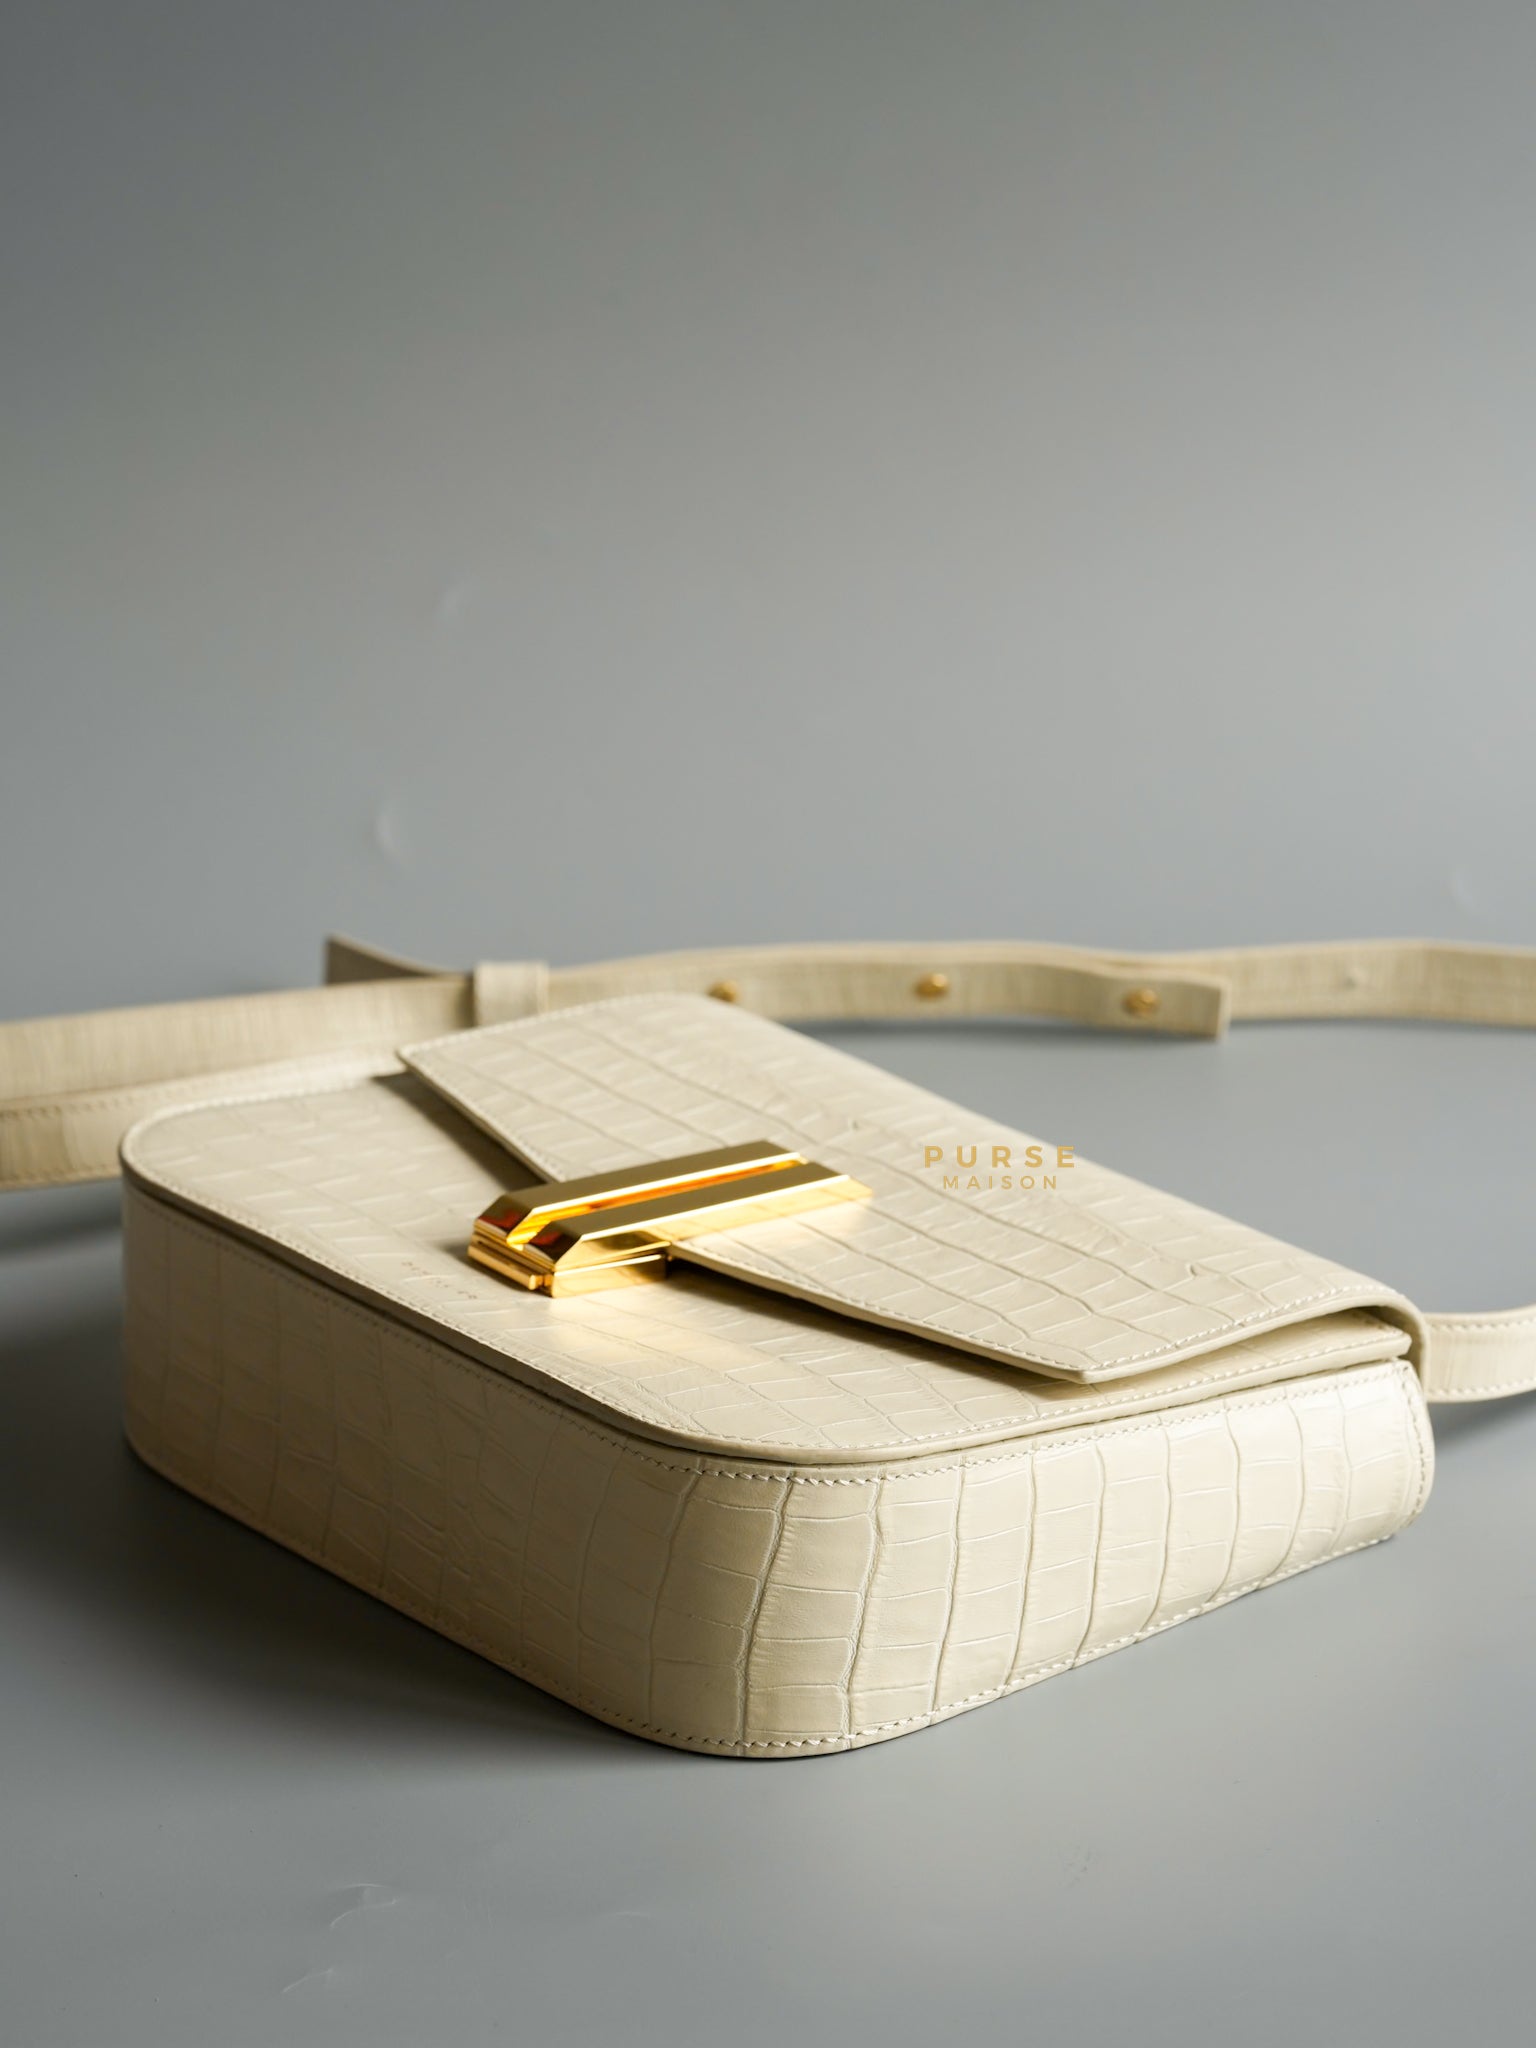 Demellier The Small Vancouver in Off-White Croc Effect Leather | Purse Maison Luxury Bags Shop